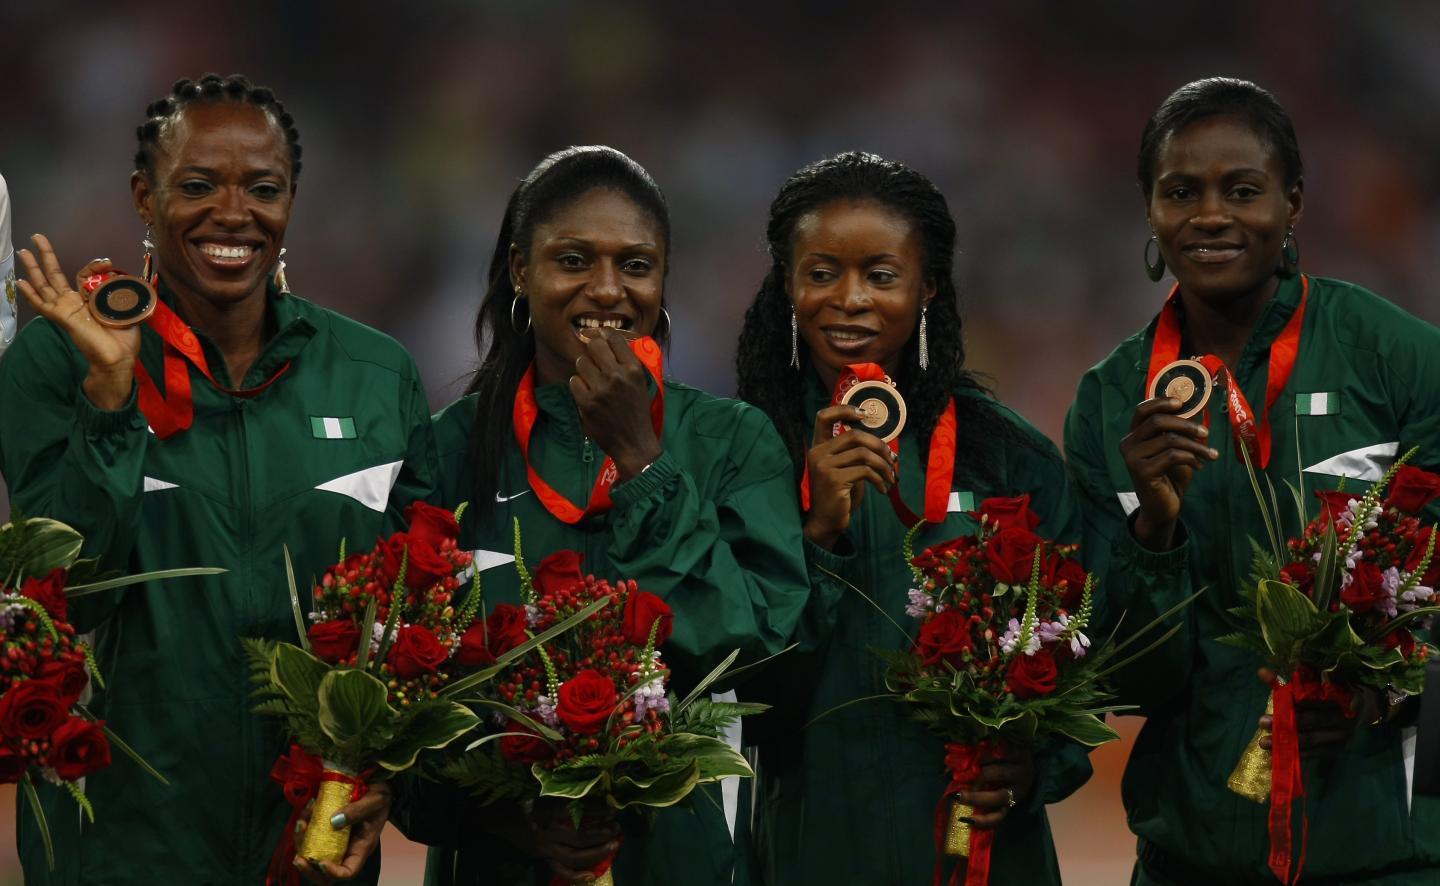  Nigeria's women's 4x100-meter relay team pose with their bronze medals at the Beijing 2008 Olympic Games, August 23, 2008. Olympic medals have been few and far between for Nigeria.  Mike Blake/Reuters 